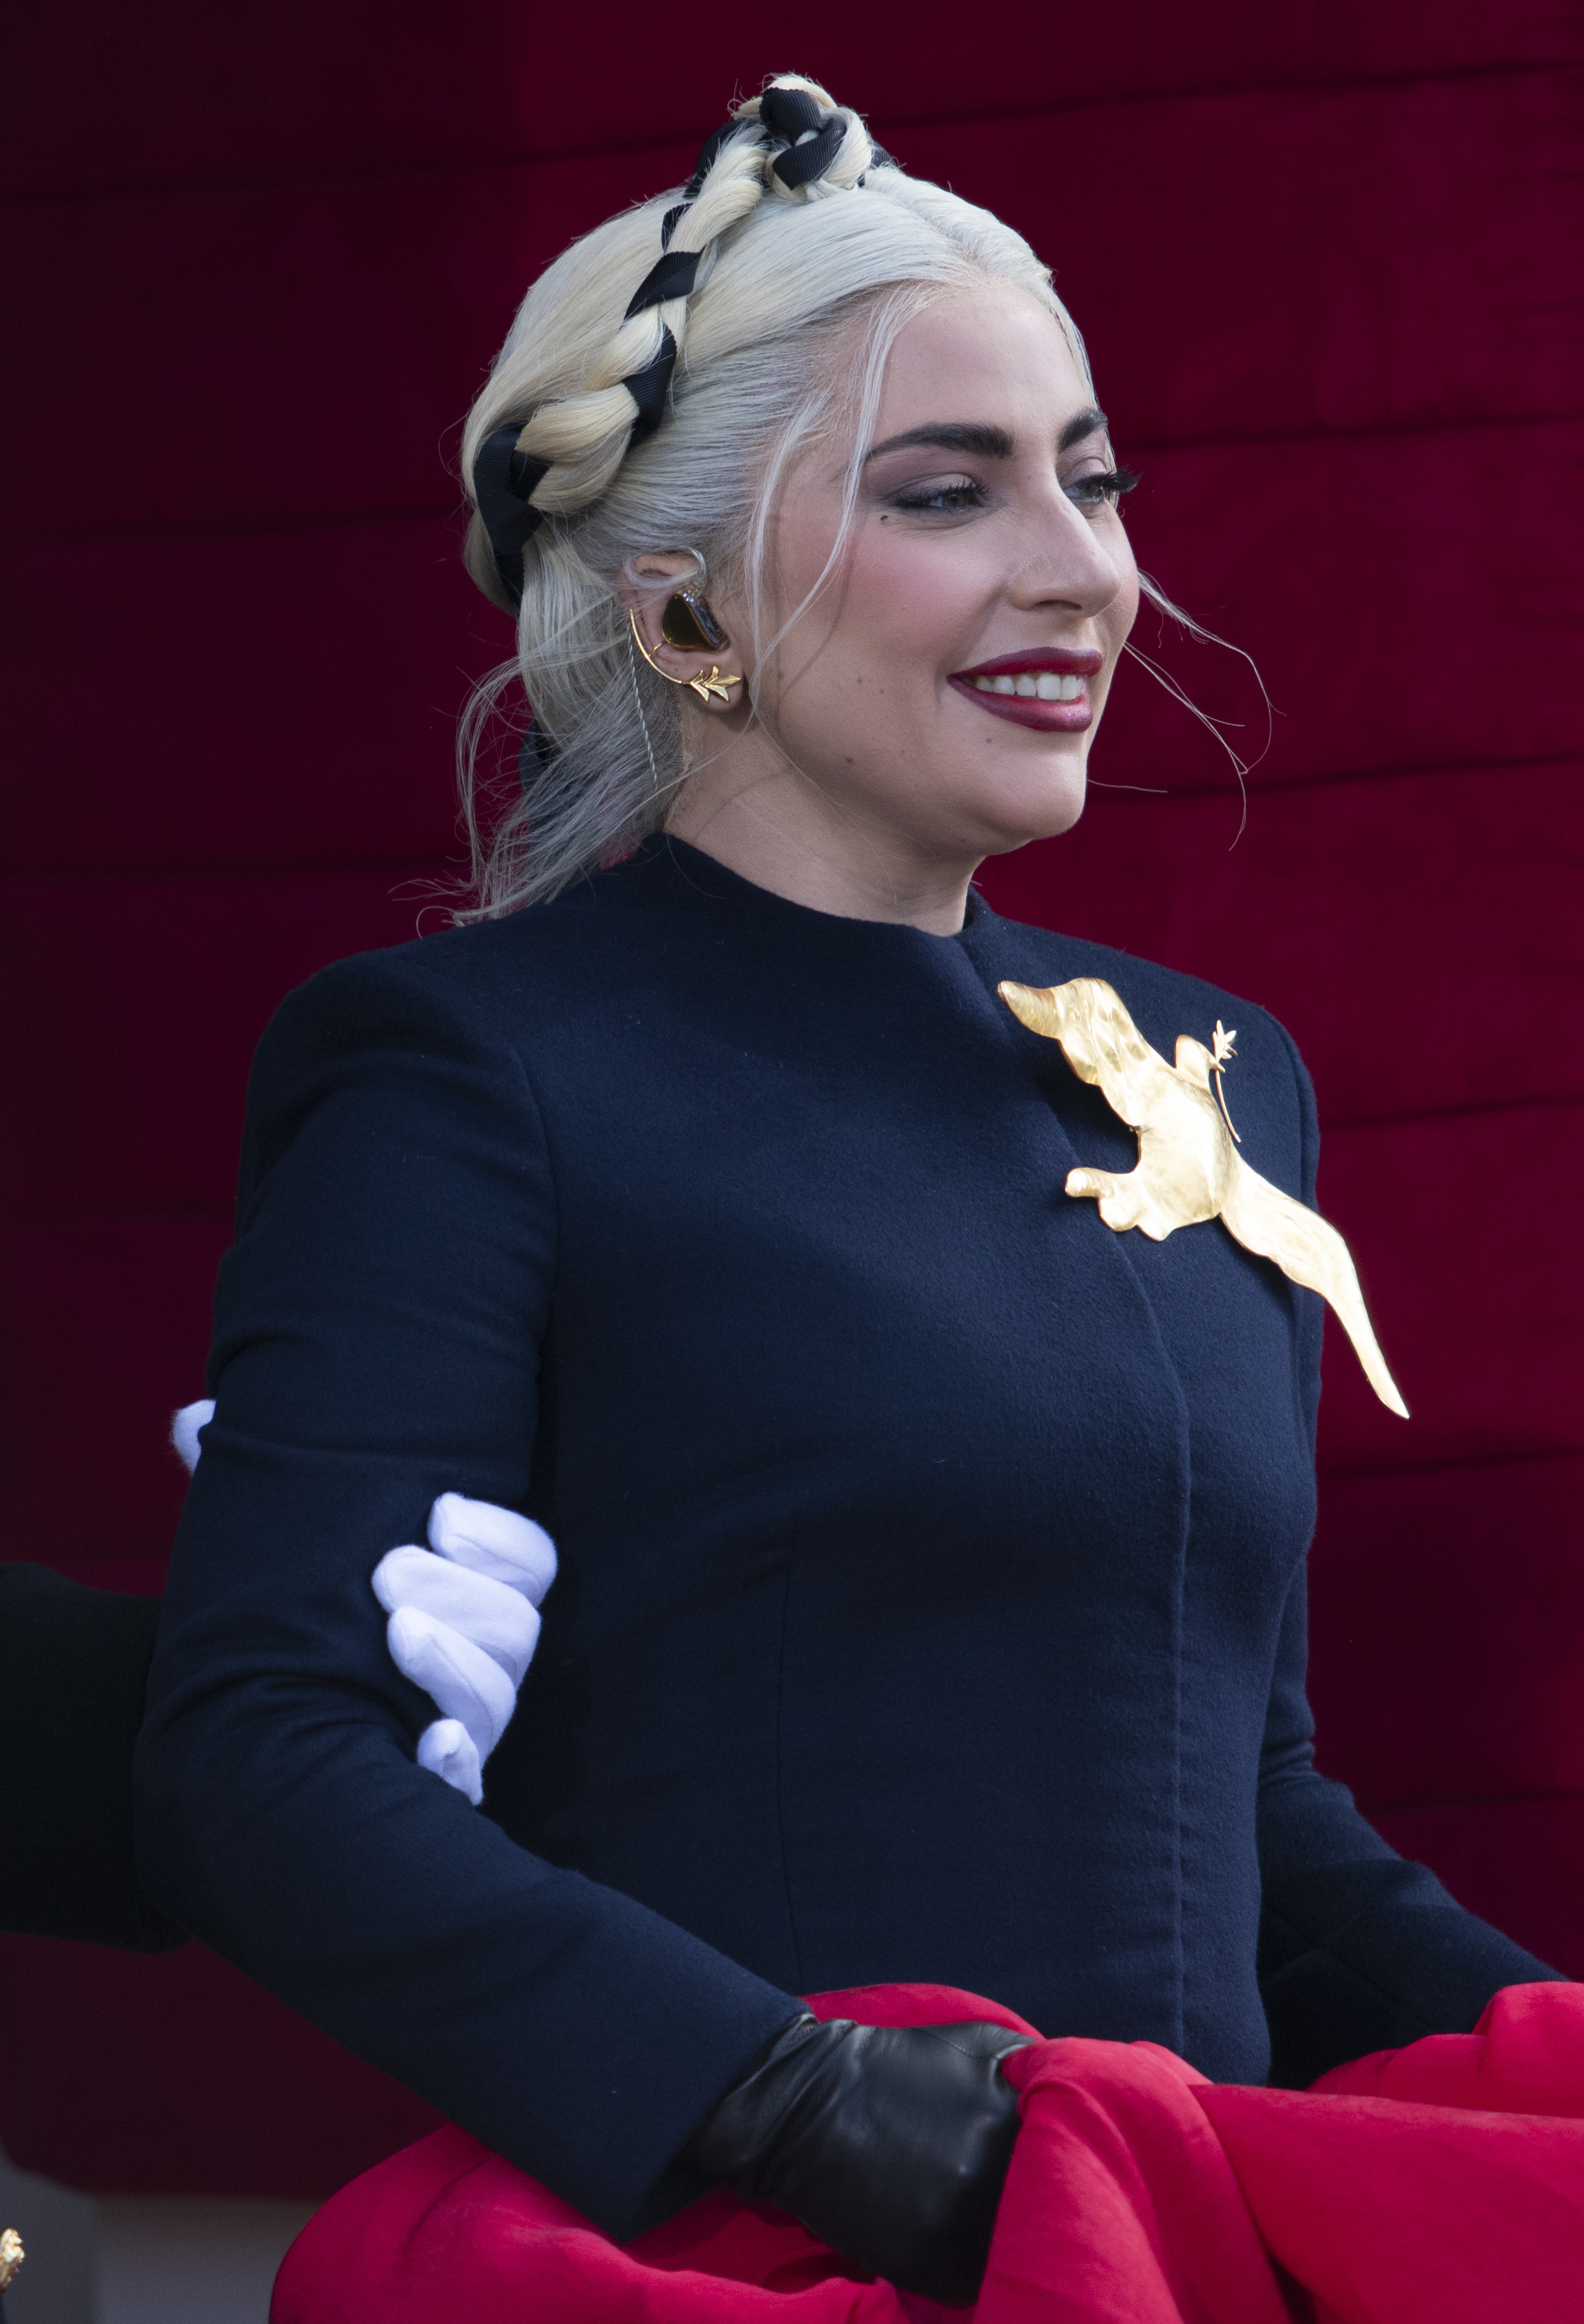 Which of the following is one of Lady Gaga's famous live performances?